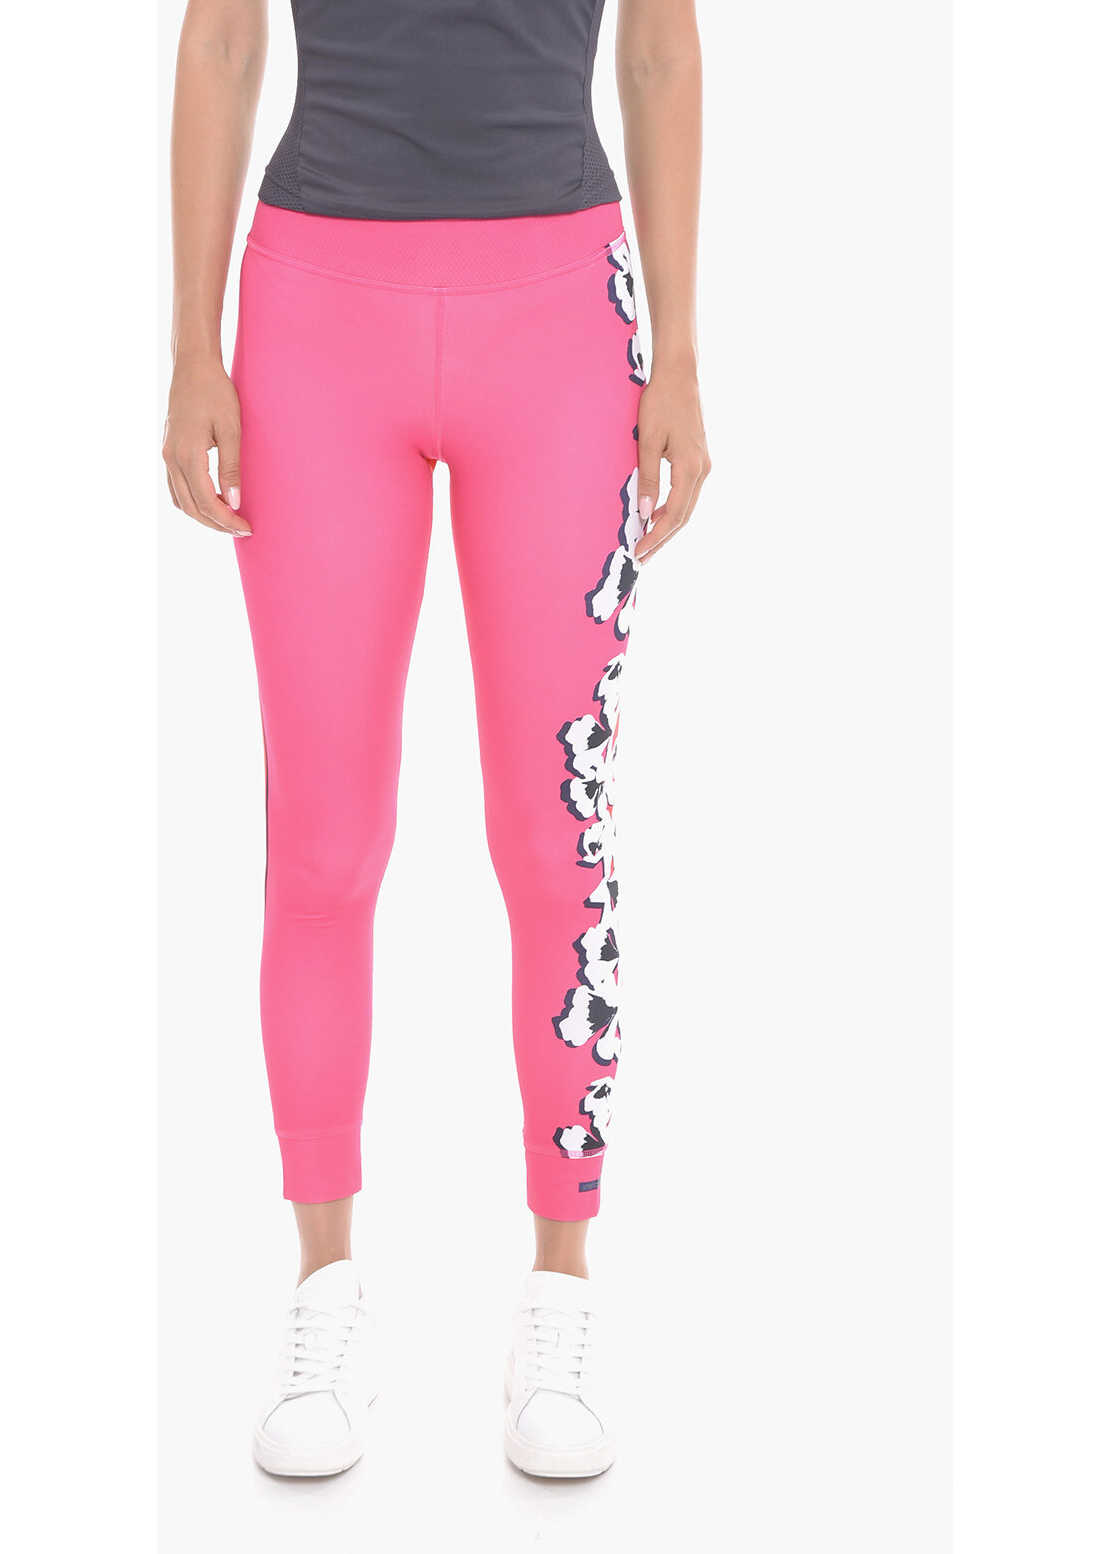 Stella McCartney Adidas Two-Tone Leggings With Floral Print Pink